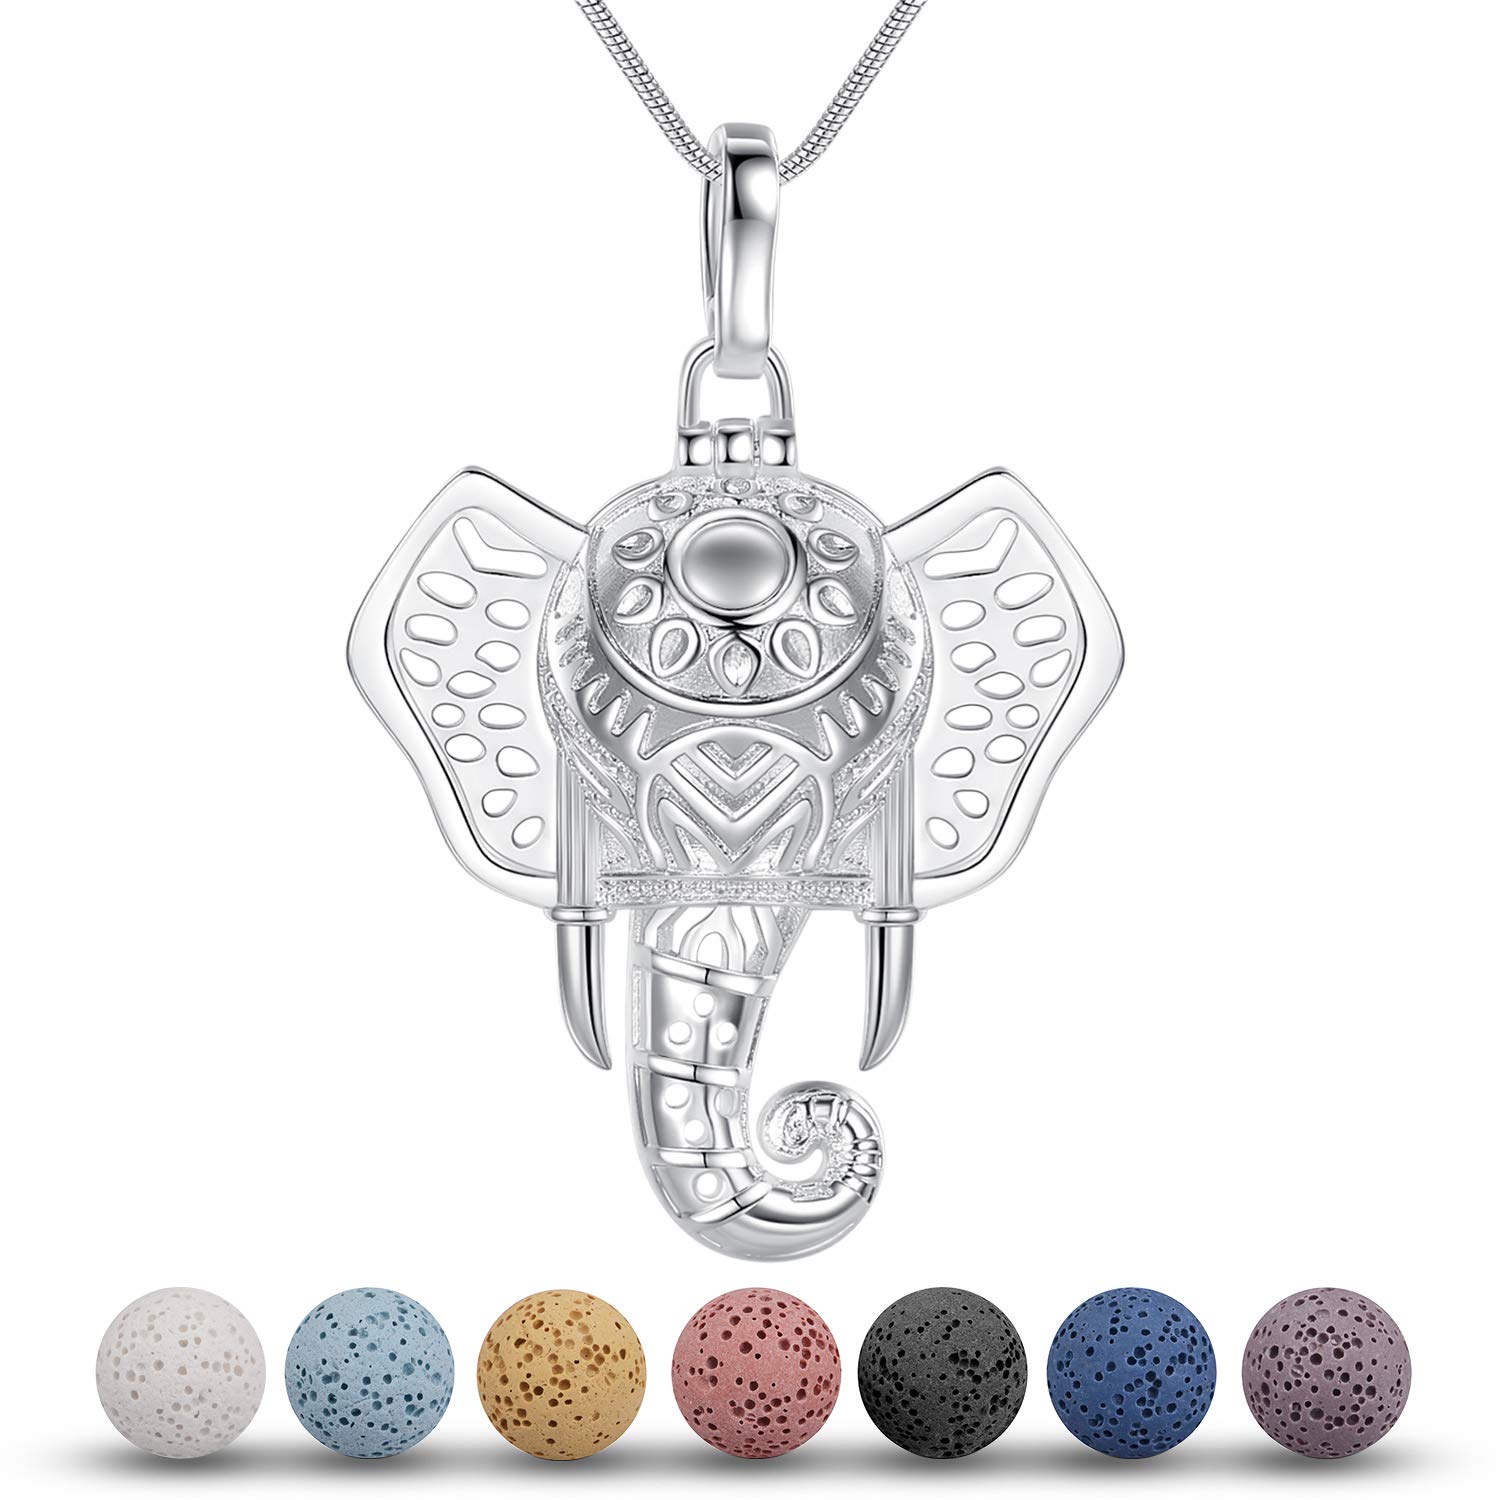 elephant-gifts-diffuser-necklace